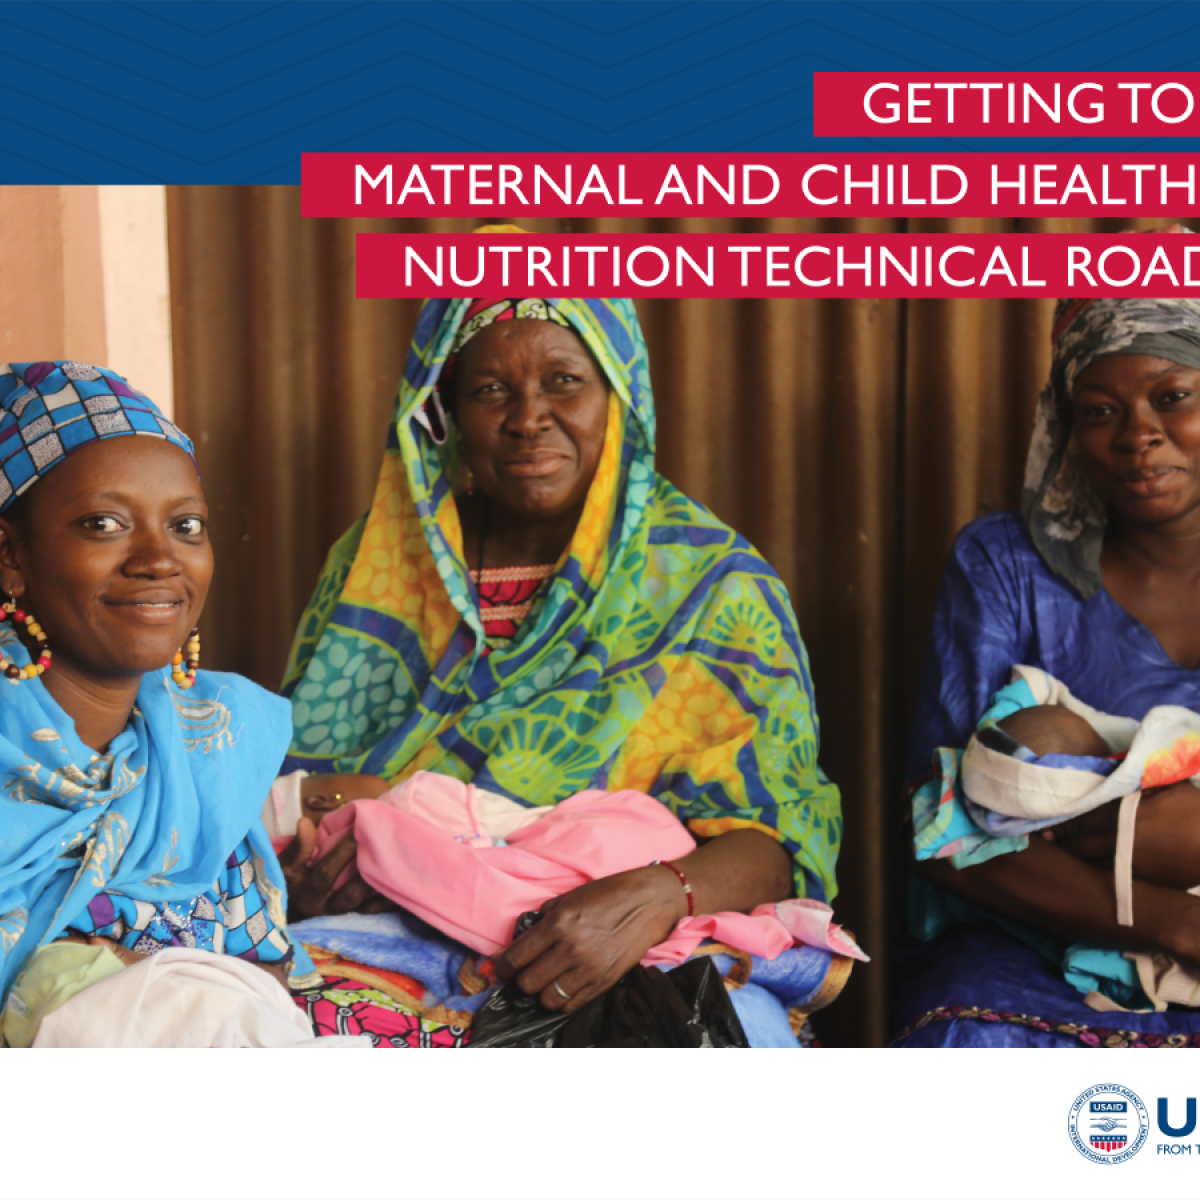 Getting to 2030: Maternal and Child Health and Nutrition Technical Roadmap